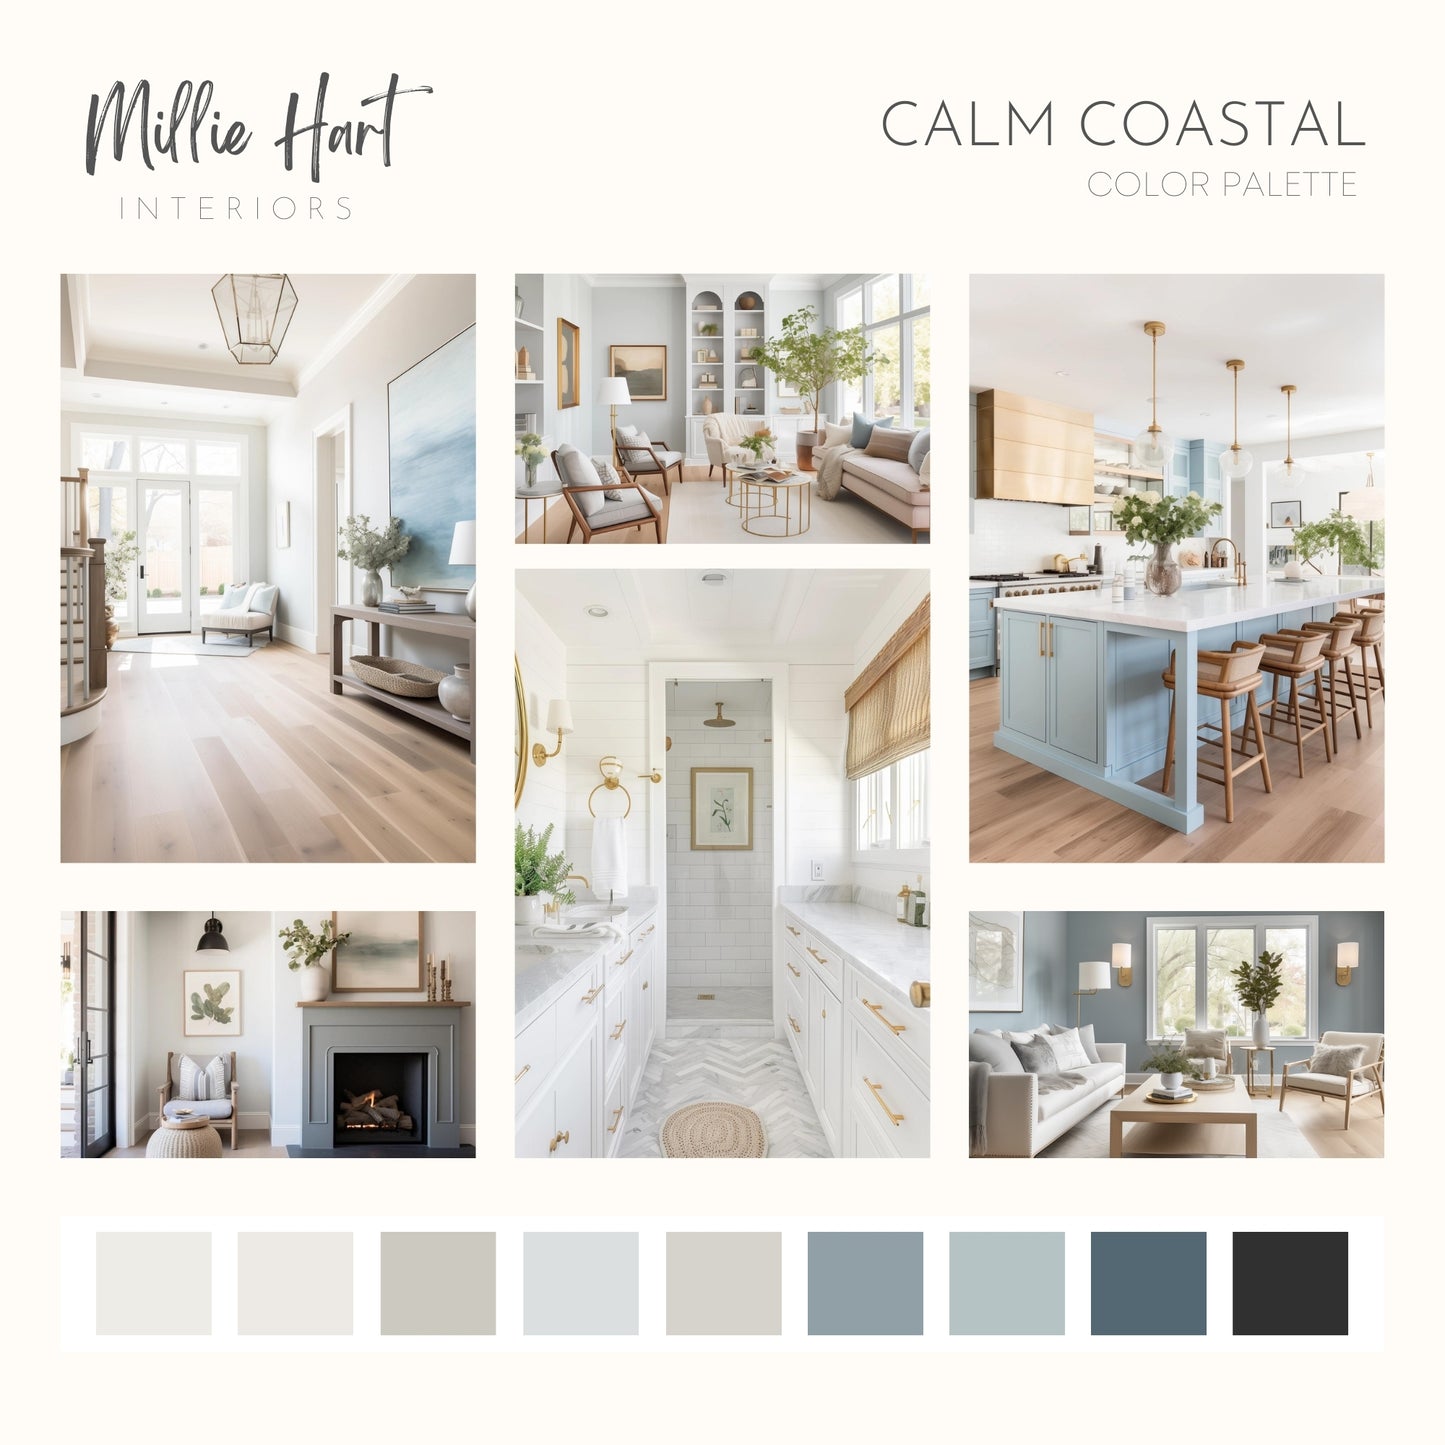 Calm Coastal Sherwin Williams Paint Palette - Modern Neutral Interior Paint Colors for Home, Coastal Interior Design Color Palette